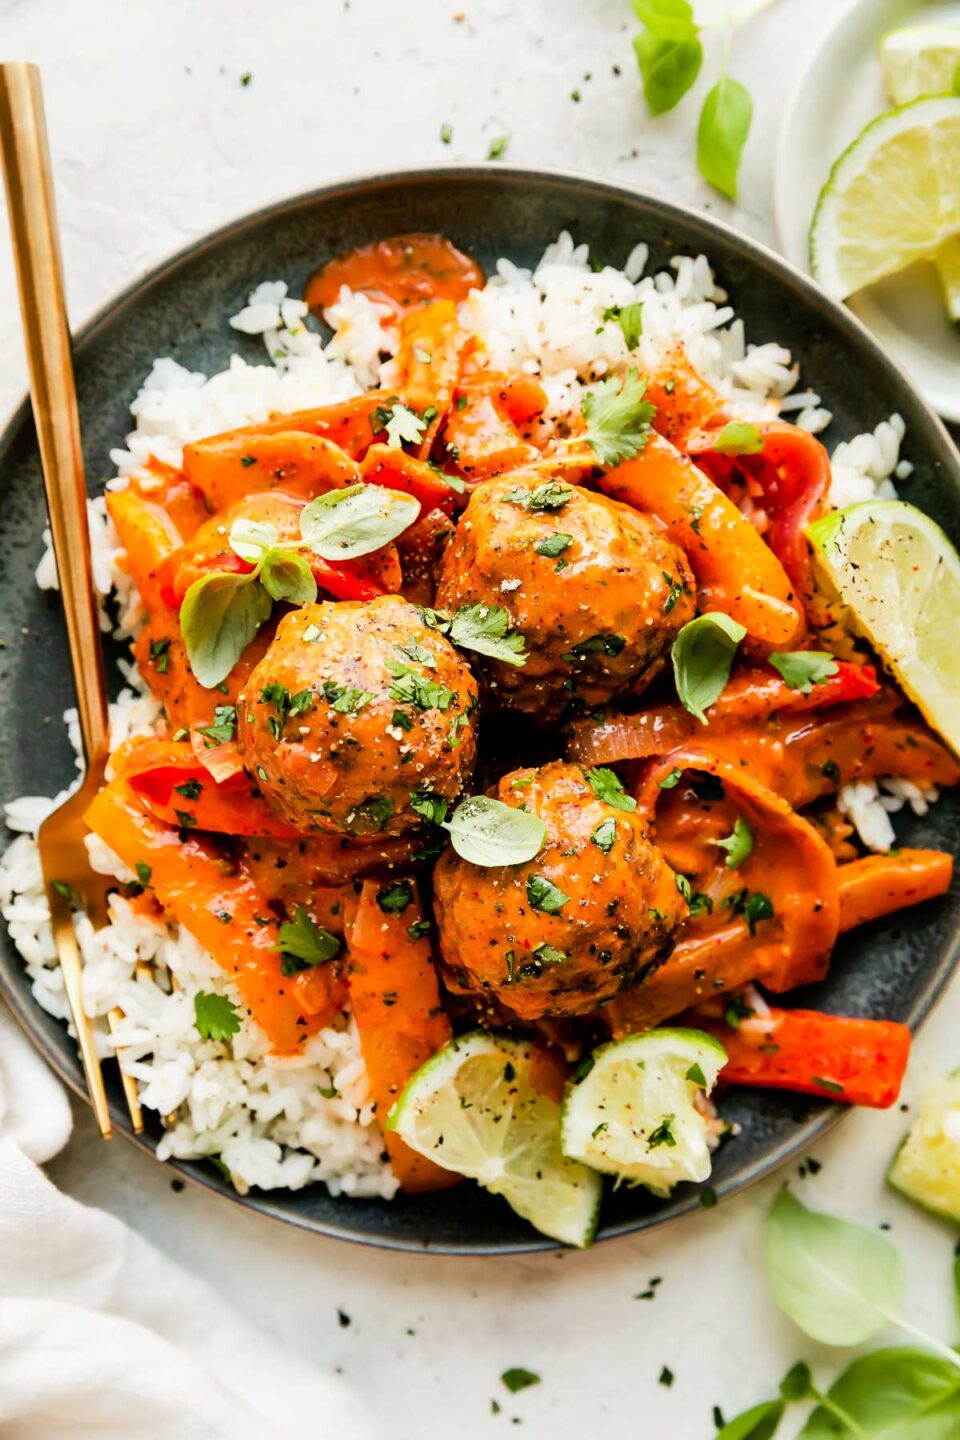 Three red curry meatballs are served atop a plateful of white rice. The blue ceramic plate sits atop a creamy white textured surface with a gold fork resting atop. The plate is surrounded by a small white plate topped with slices of lime, fresh basil leaves, and a white linen napkin.